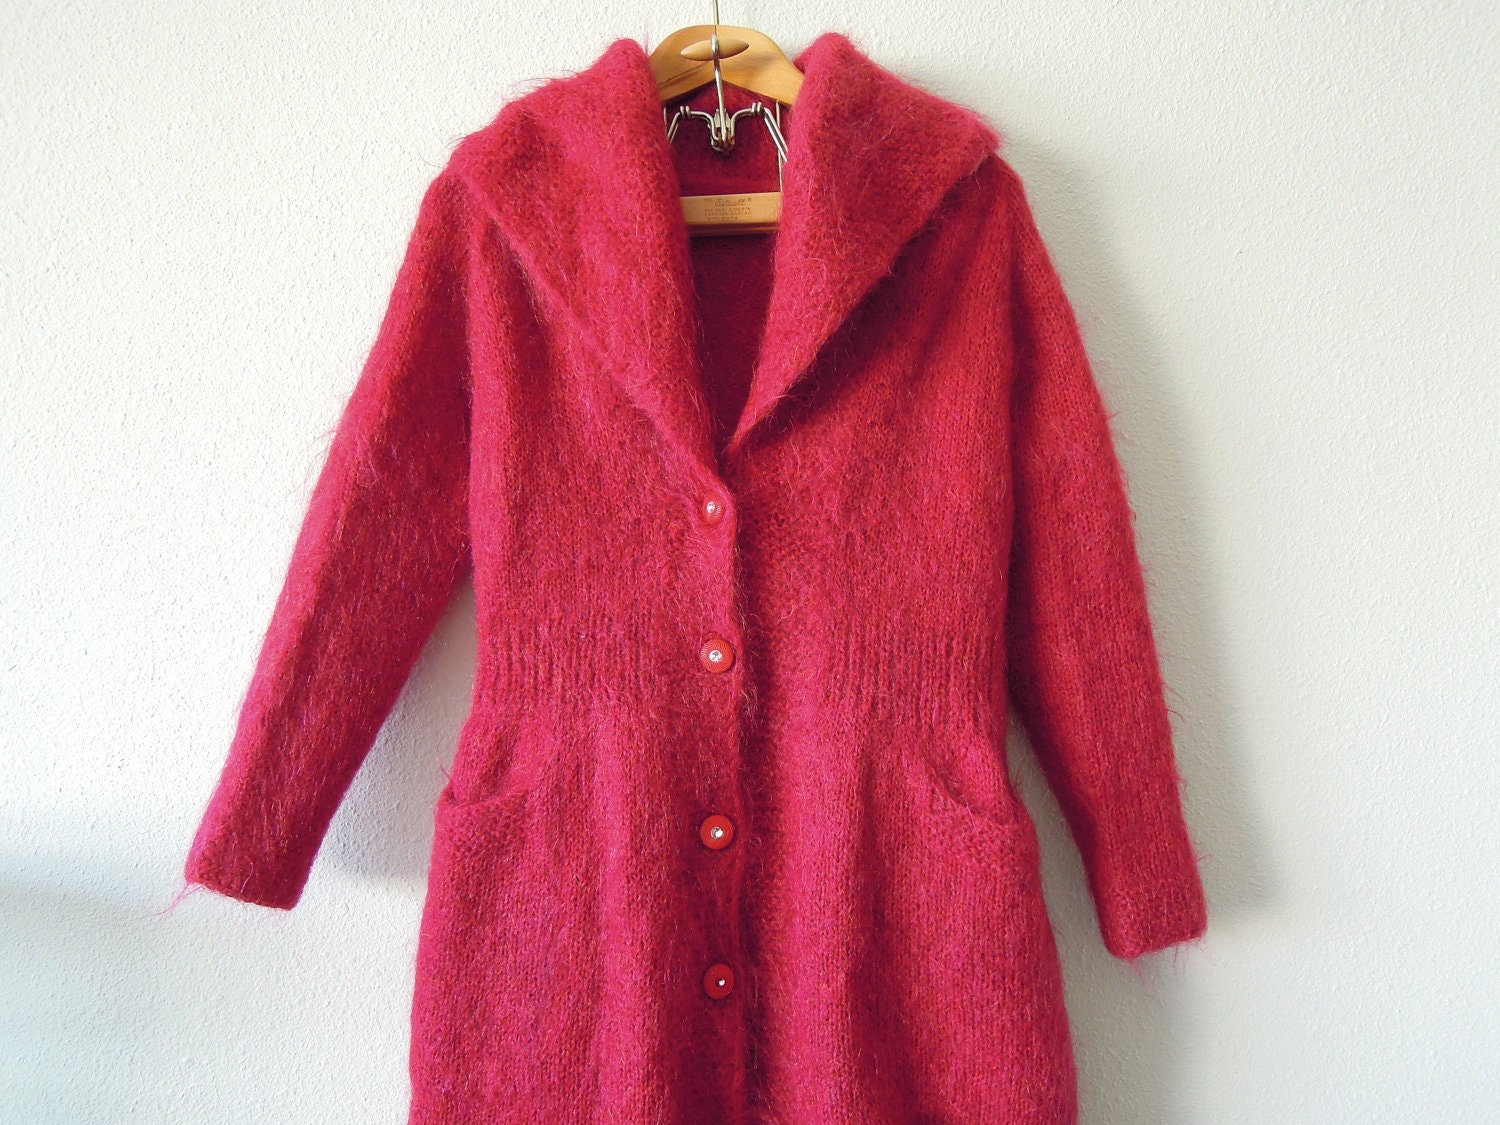 SALE Ruby Mohair Fuzzy Sweater Jacket Half Coat Size Small to